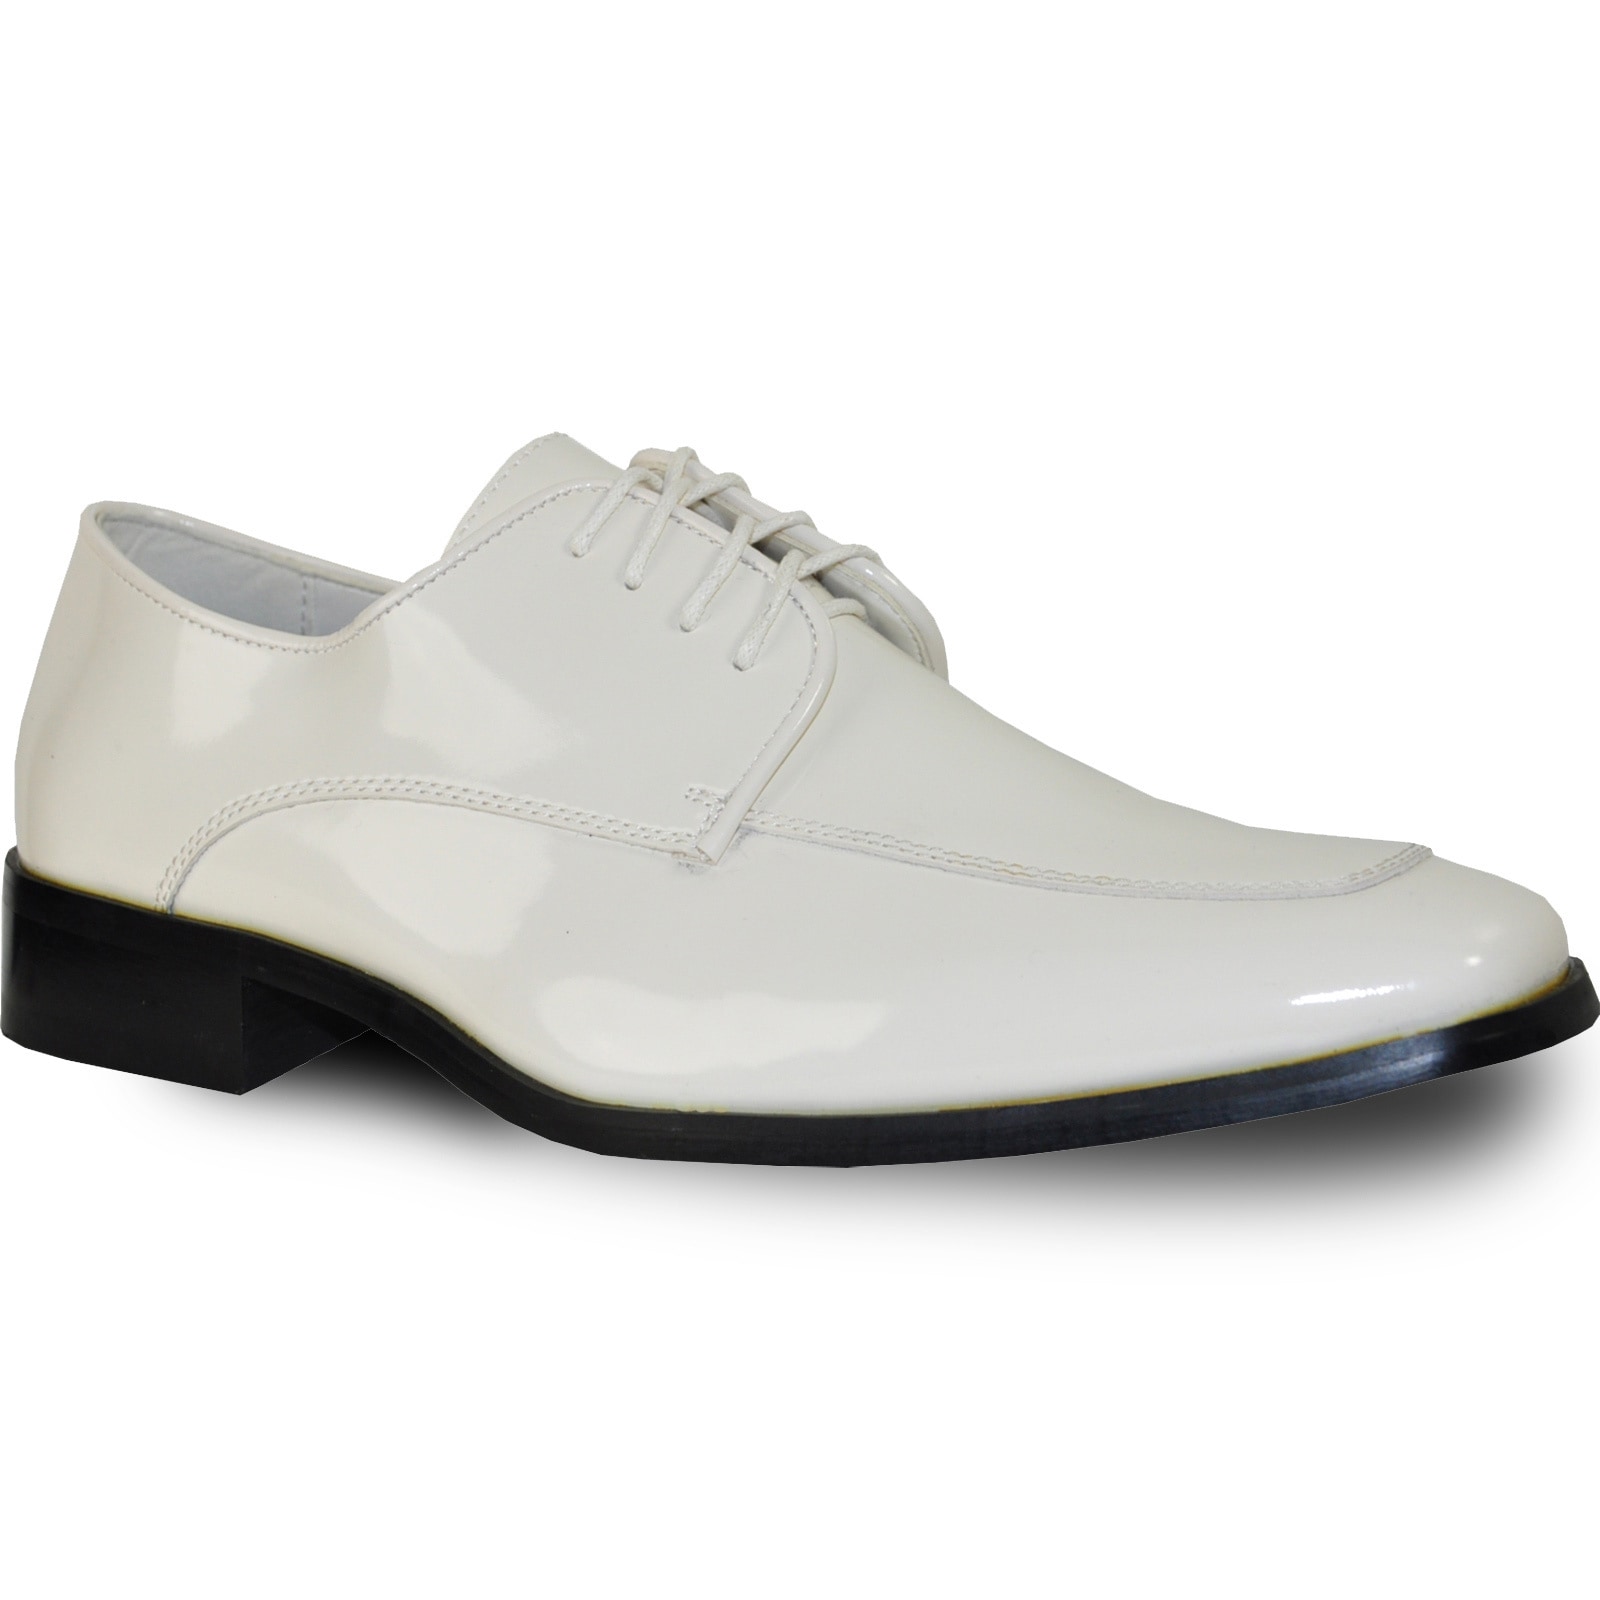 ivory wedding shoes for men